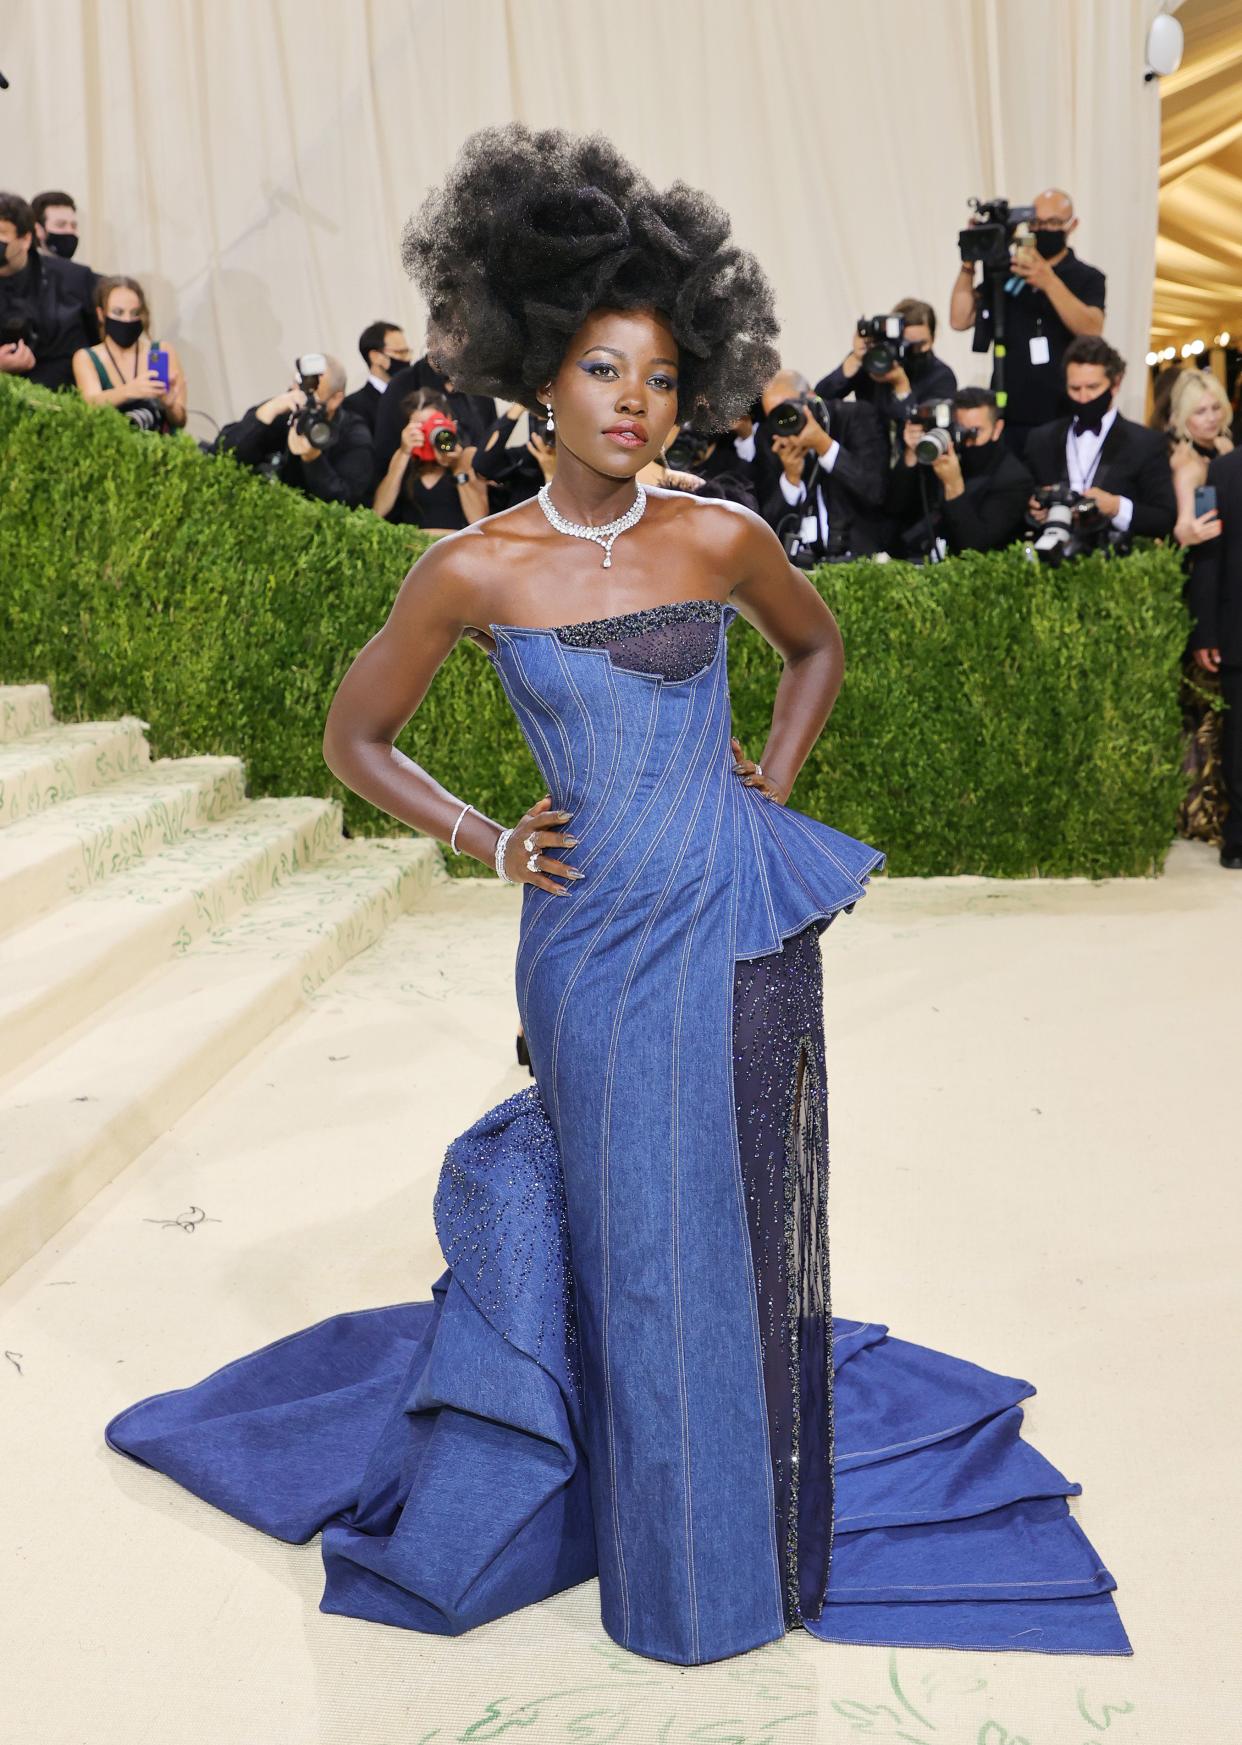 Lupita Nyong'o  attends The 2021 Met Gala Celebrating In America: A Lexicon Of Fashion at Metropolitan Museum of Art on Sept. 13, 2021 in New York.